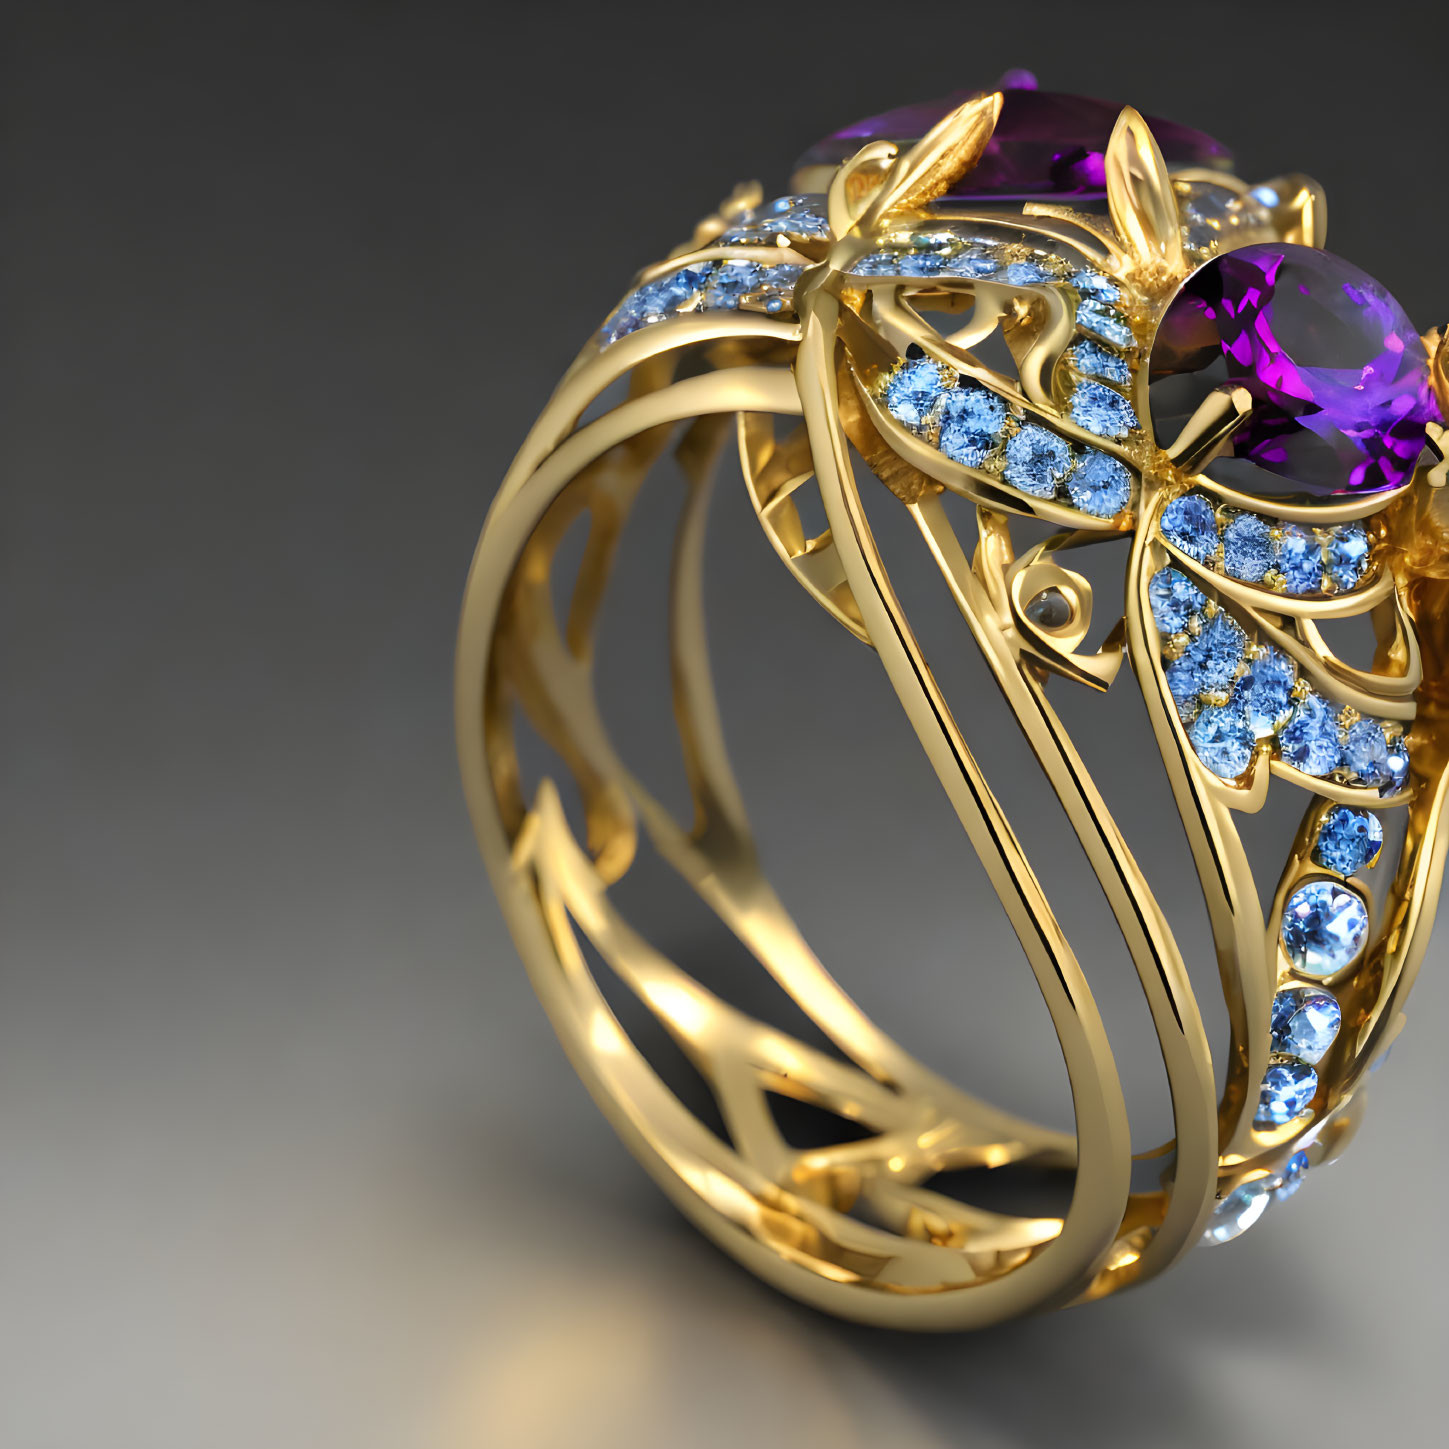 Gold Ring with Purple Gemstone & Diamond Accents on Grey Background